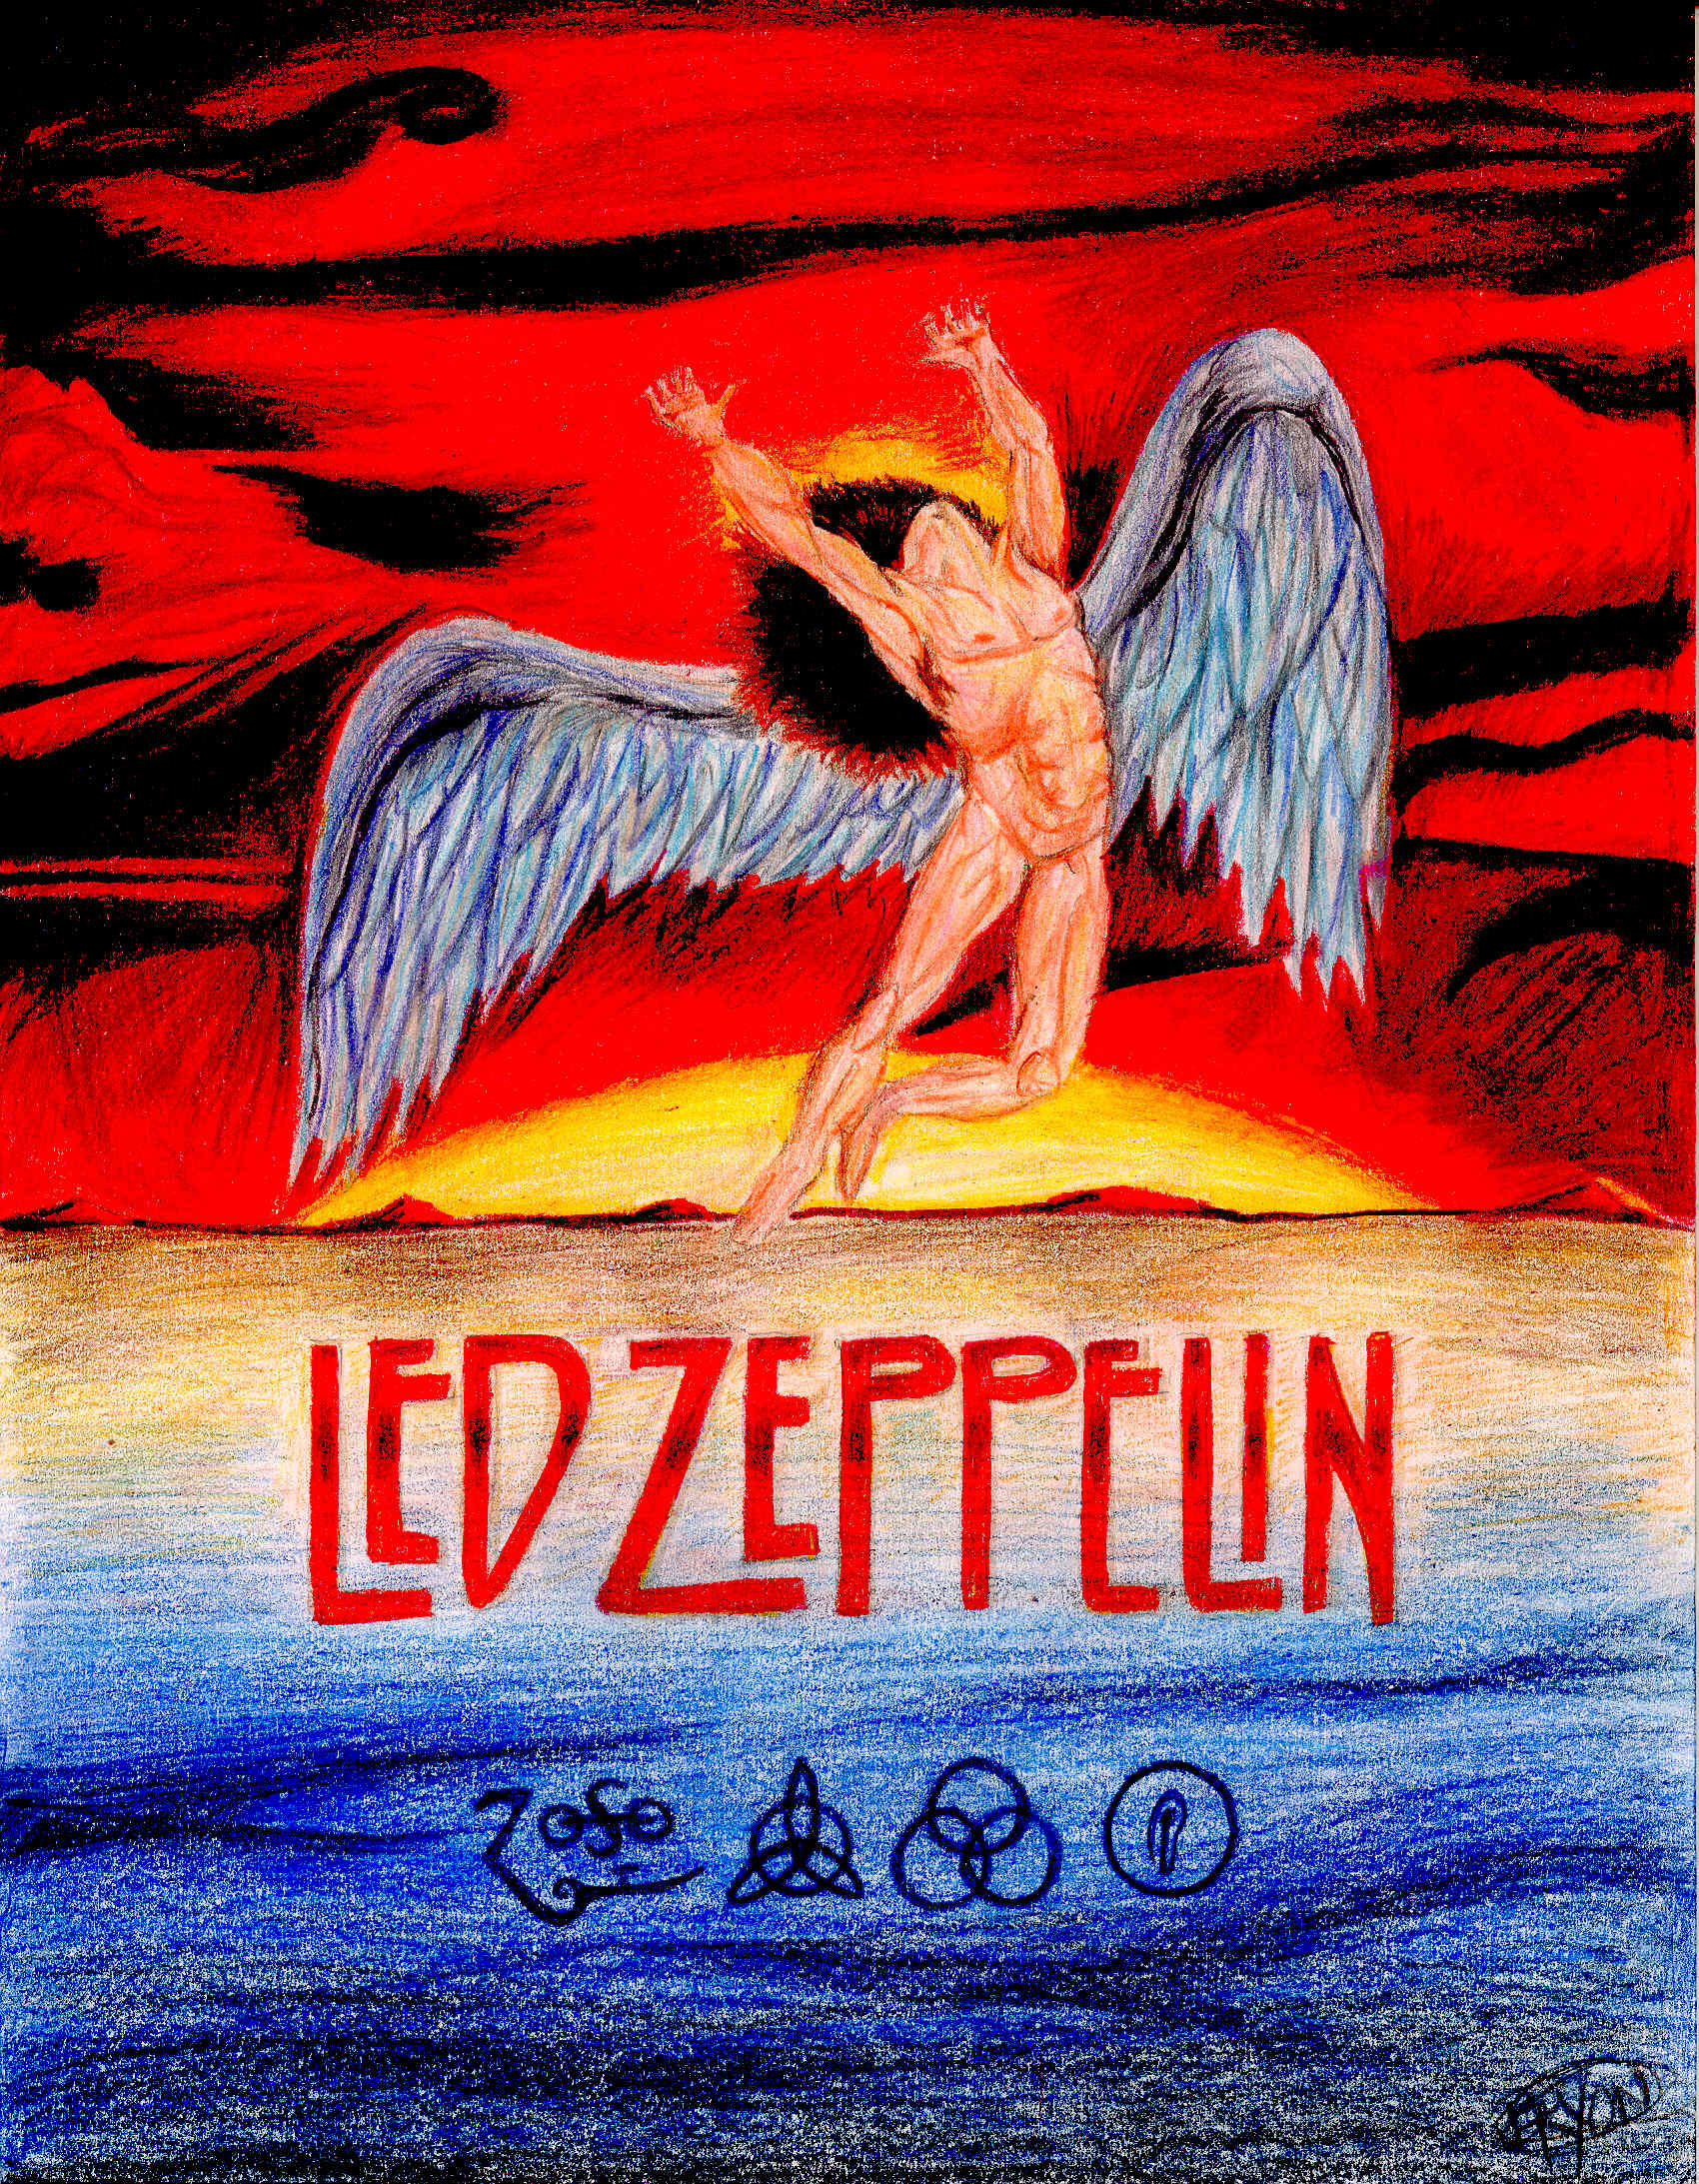 1700x2185 led zeppelin album covers - Google Search